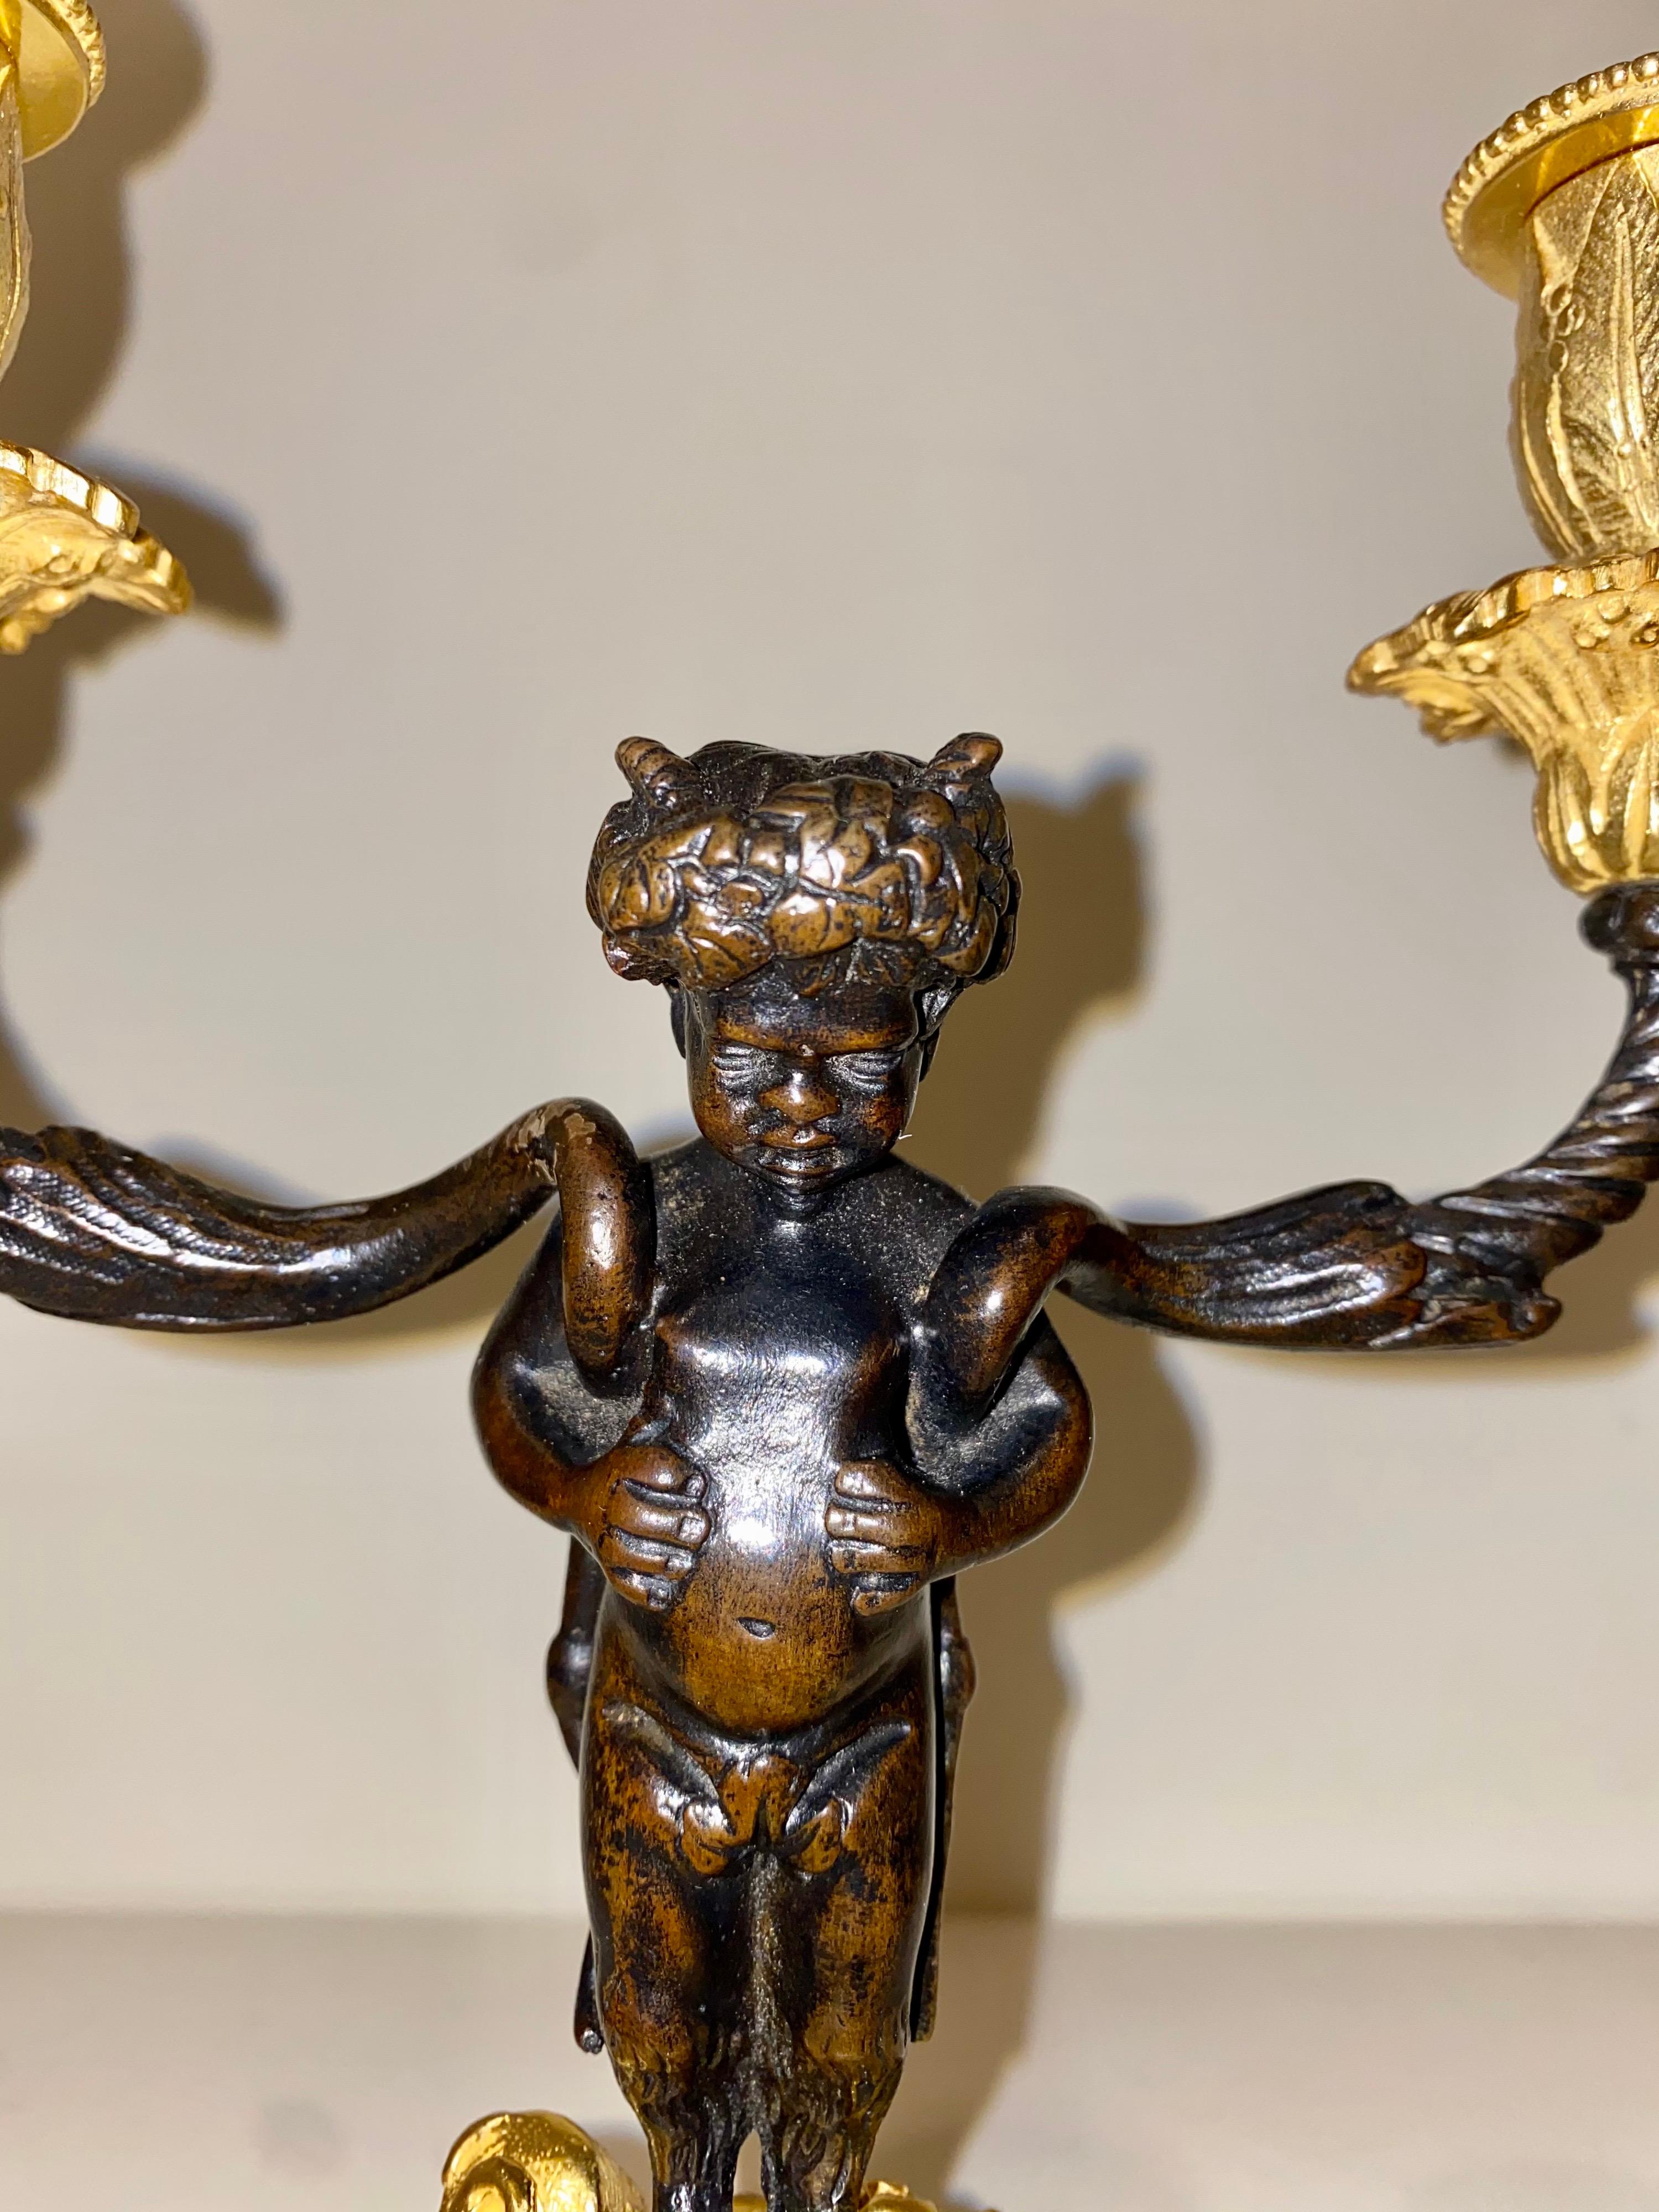 A pair of French 2 light gilt bronze cherub candelabra circa 19th century
Cleaned and ready to present.